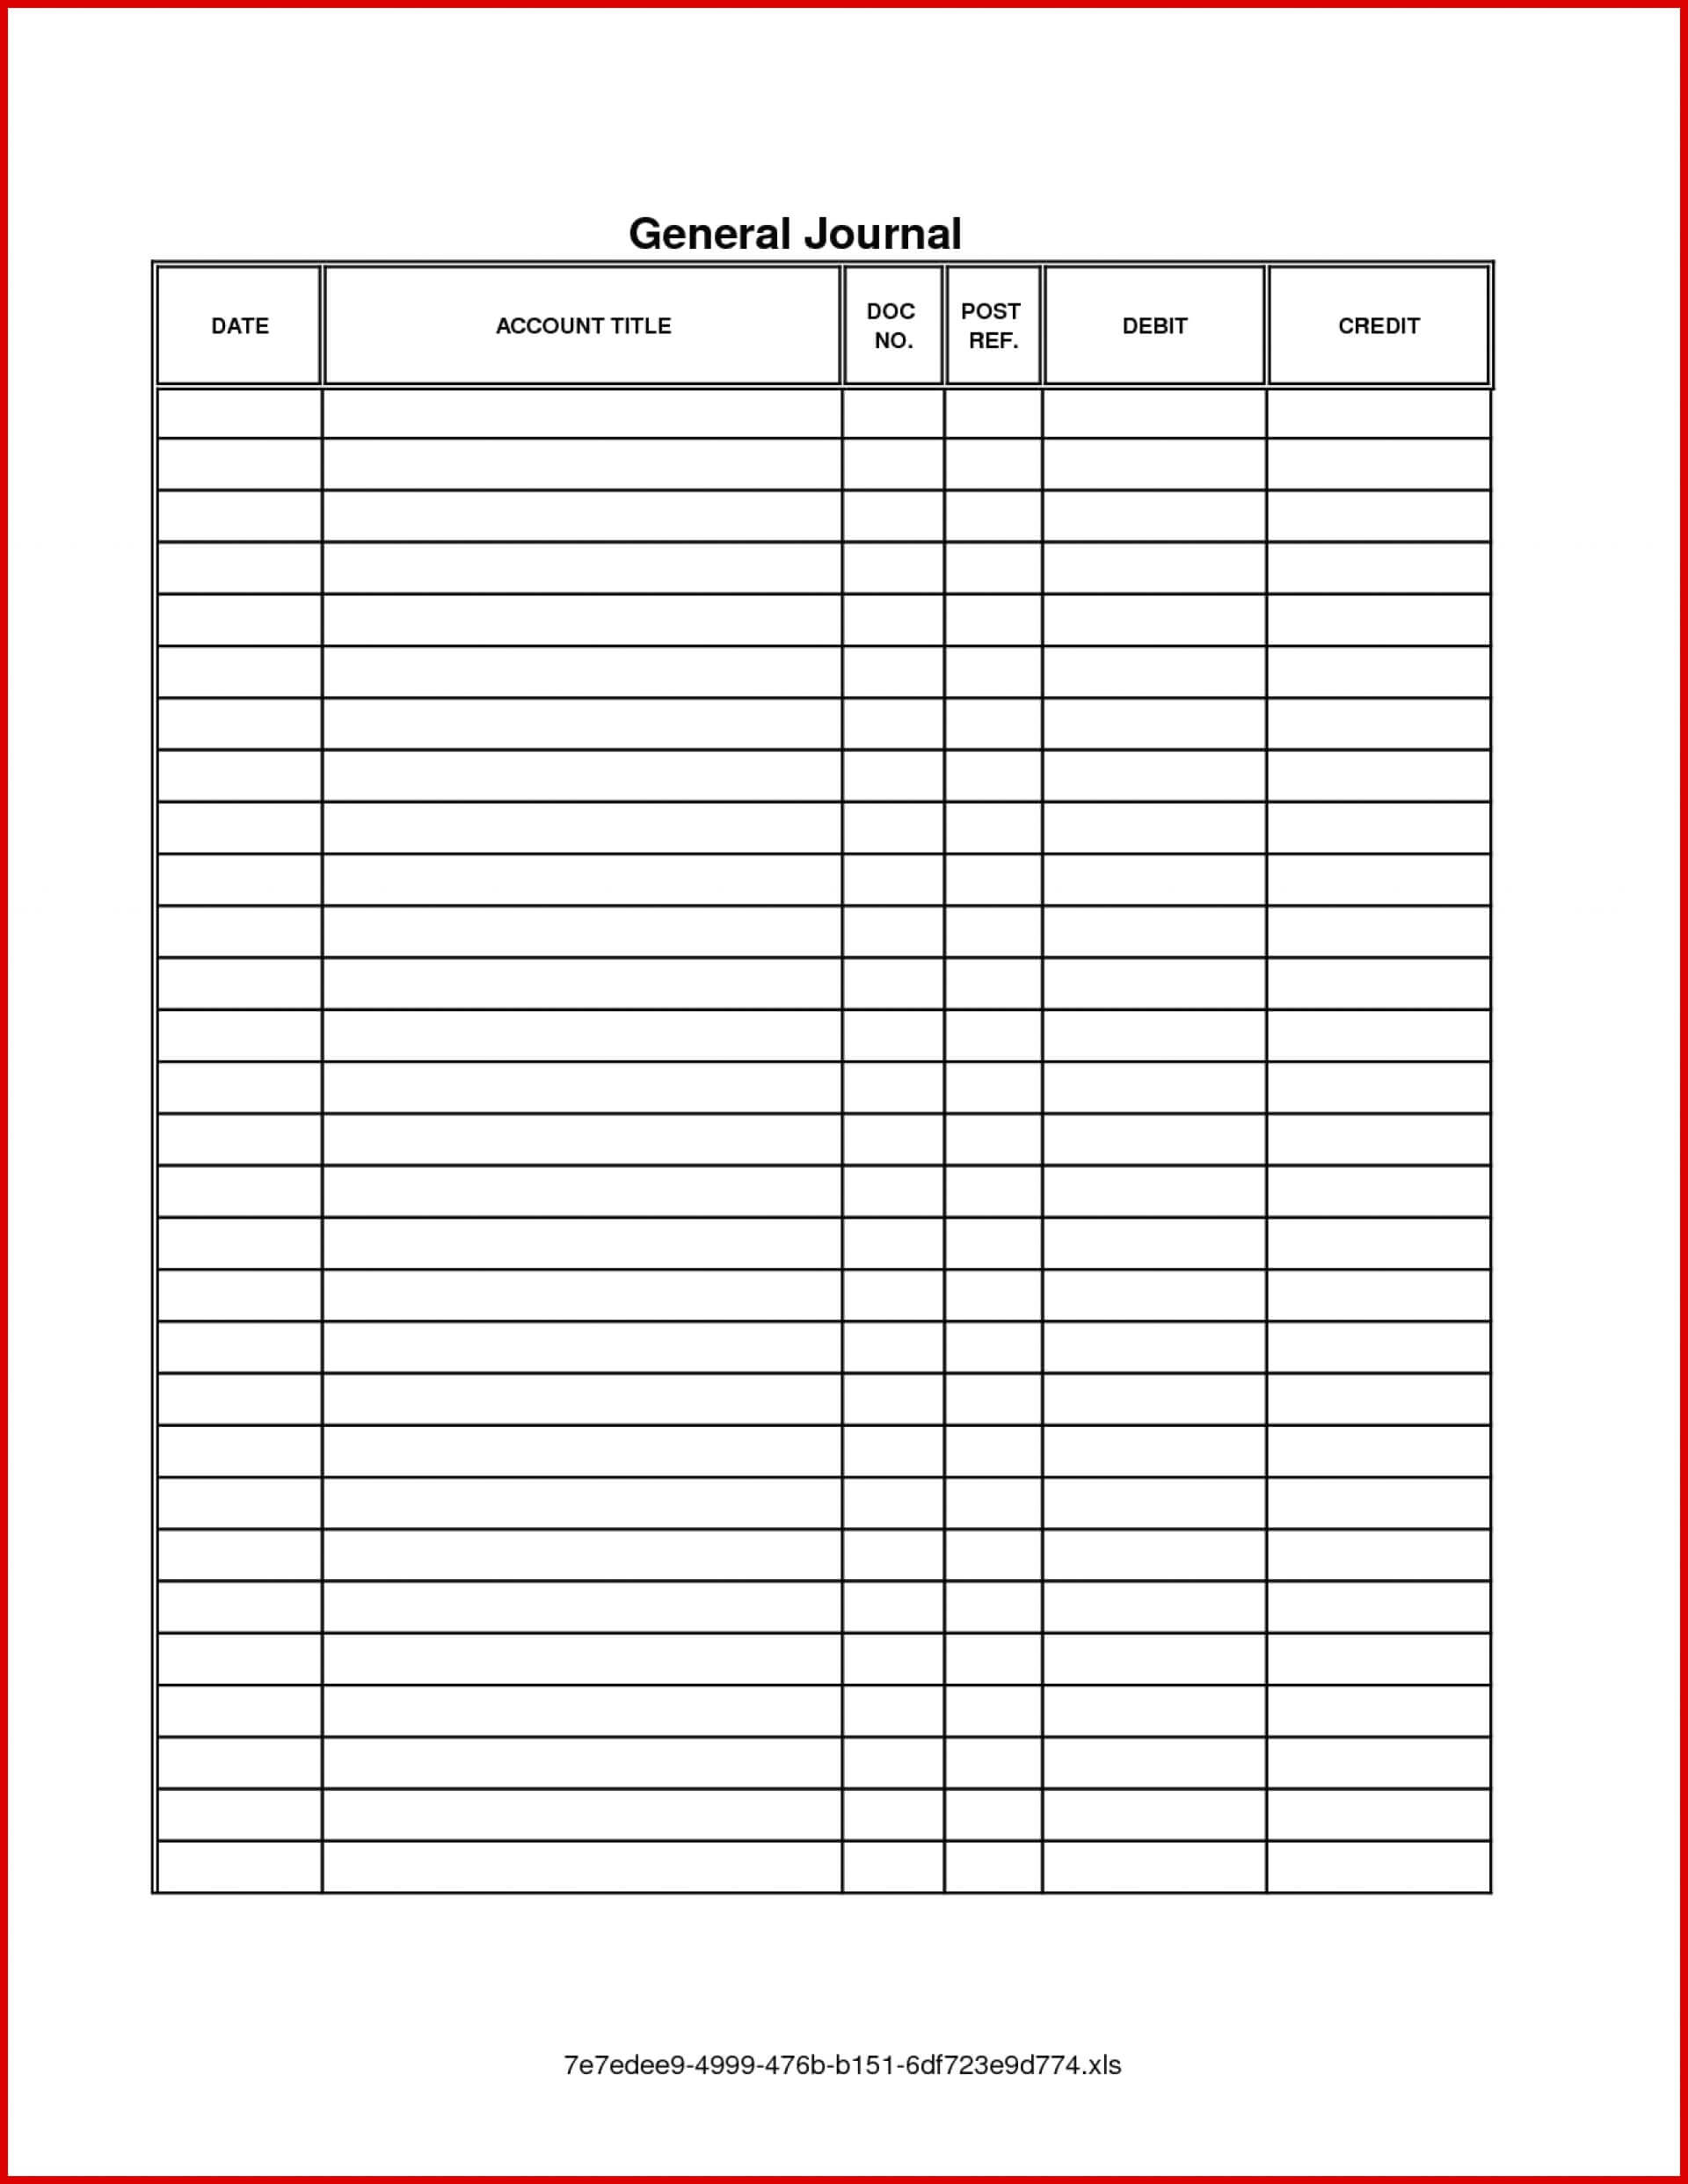 036 Accounting Journal Entry Template Policy And Procedure Within Blank Ledger Template